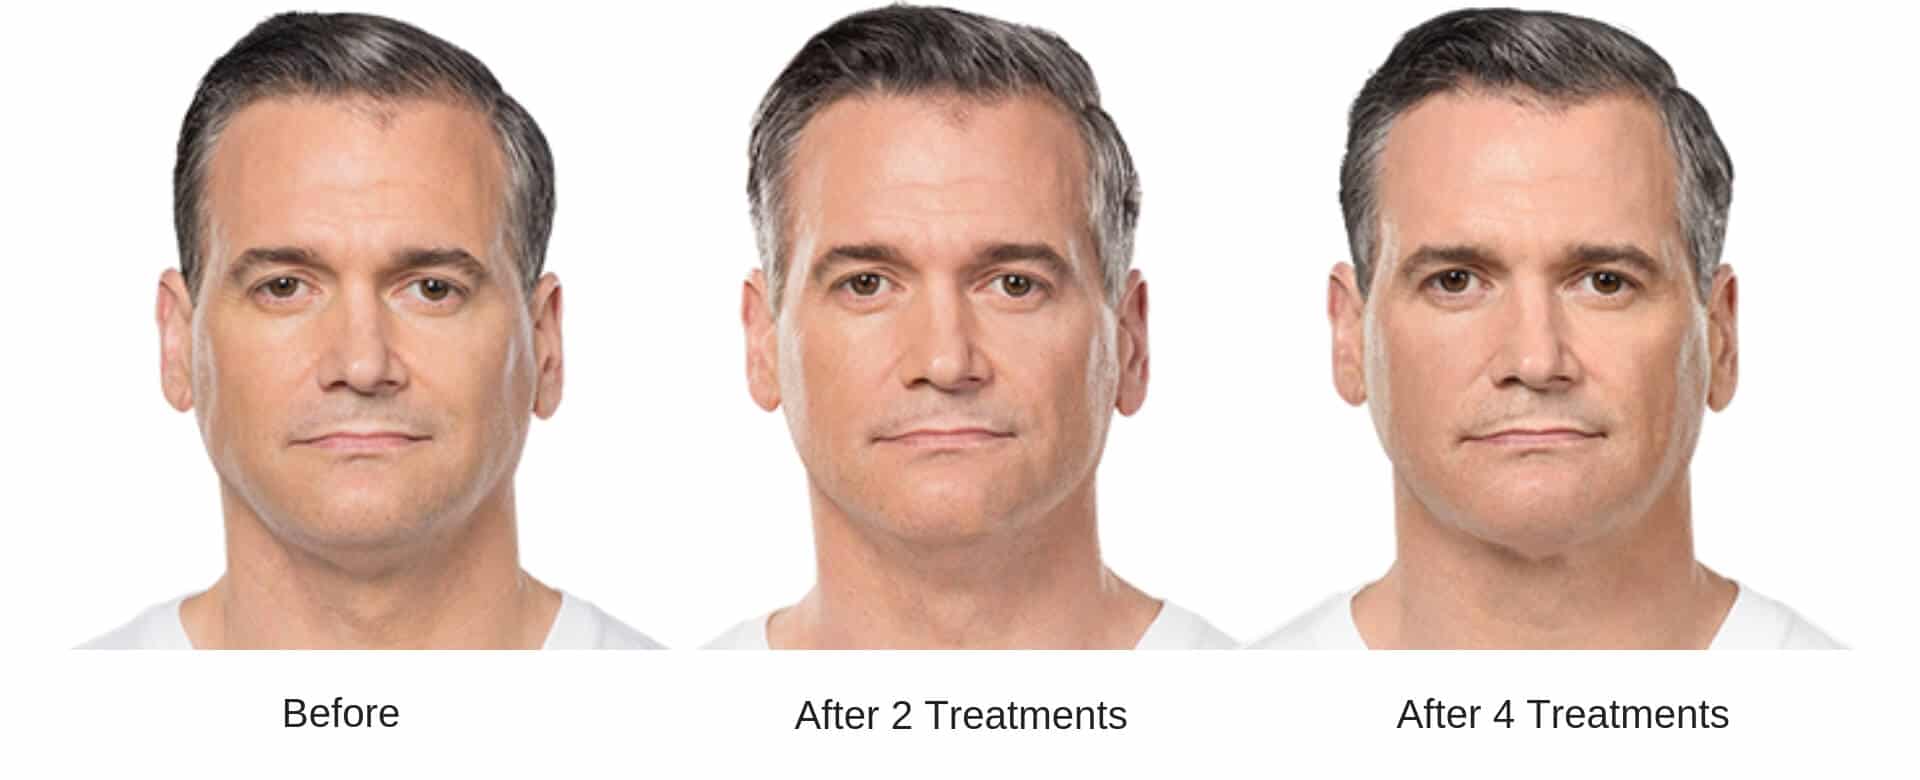 Mans before and after 6 treatment results from Kybella.